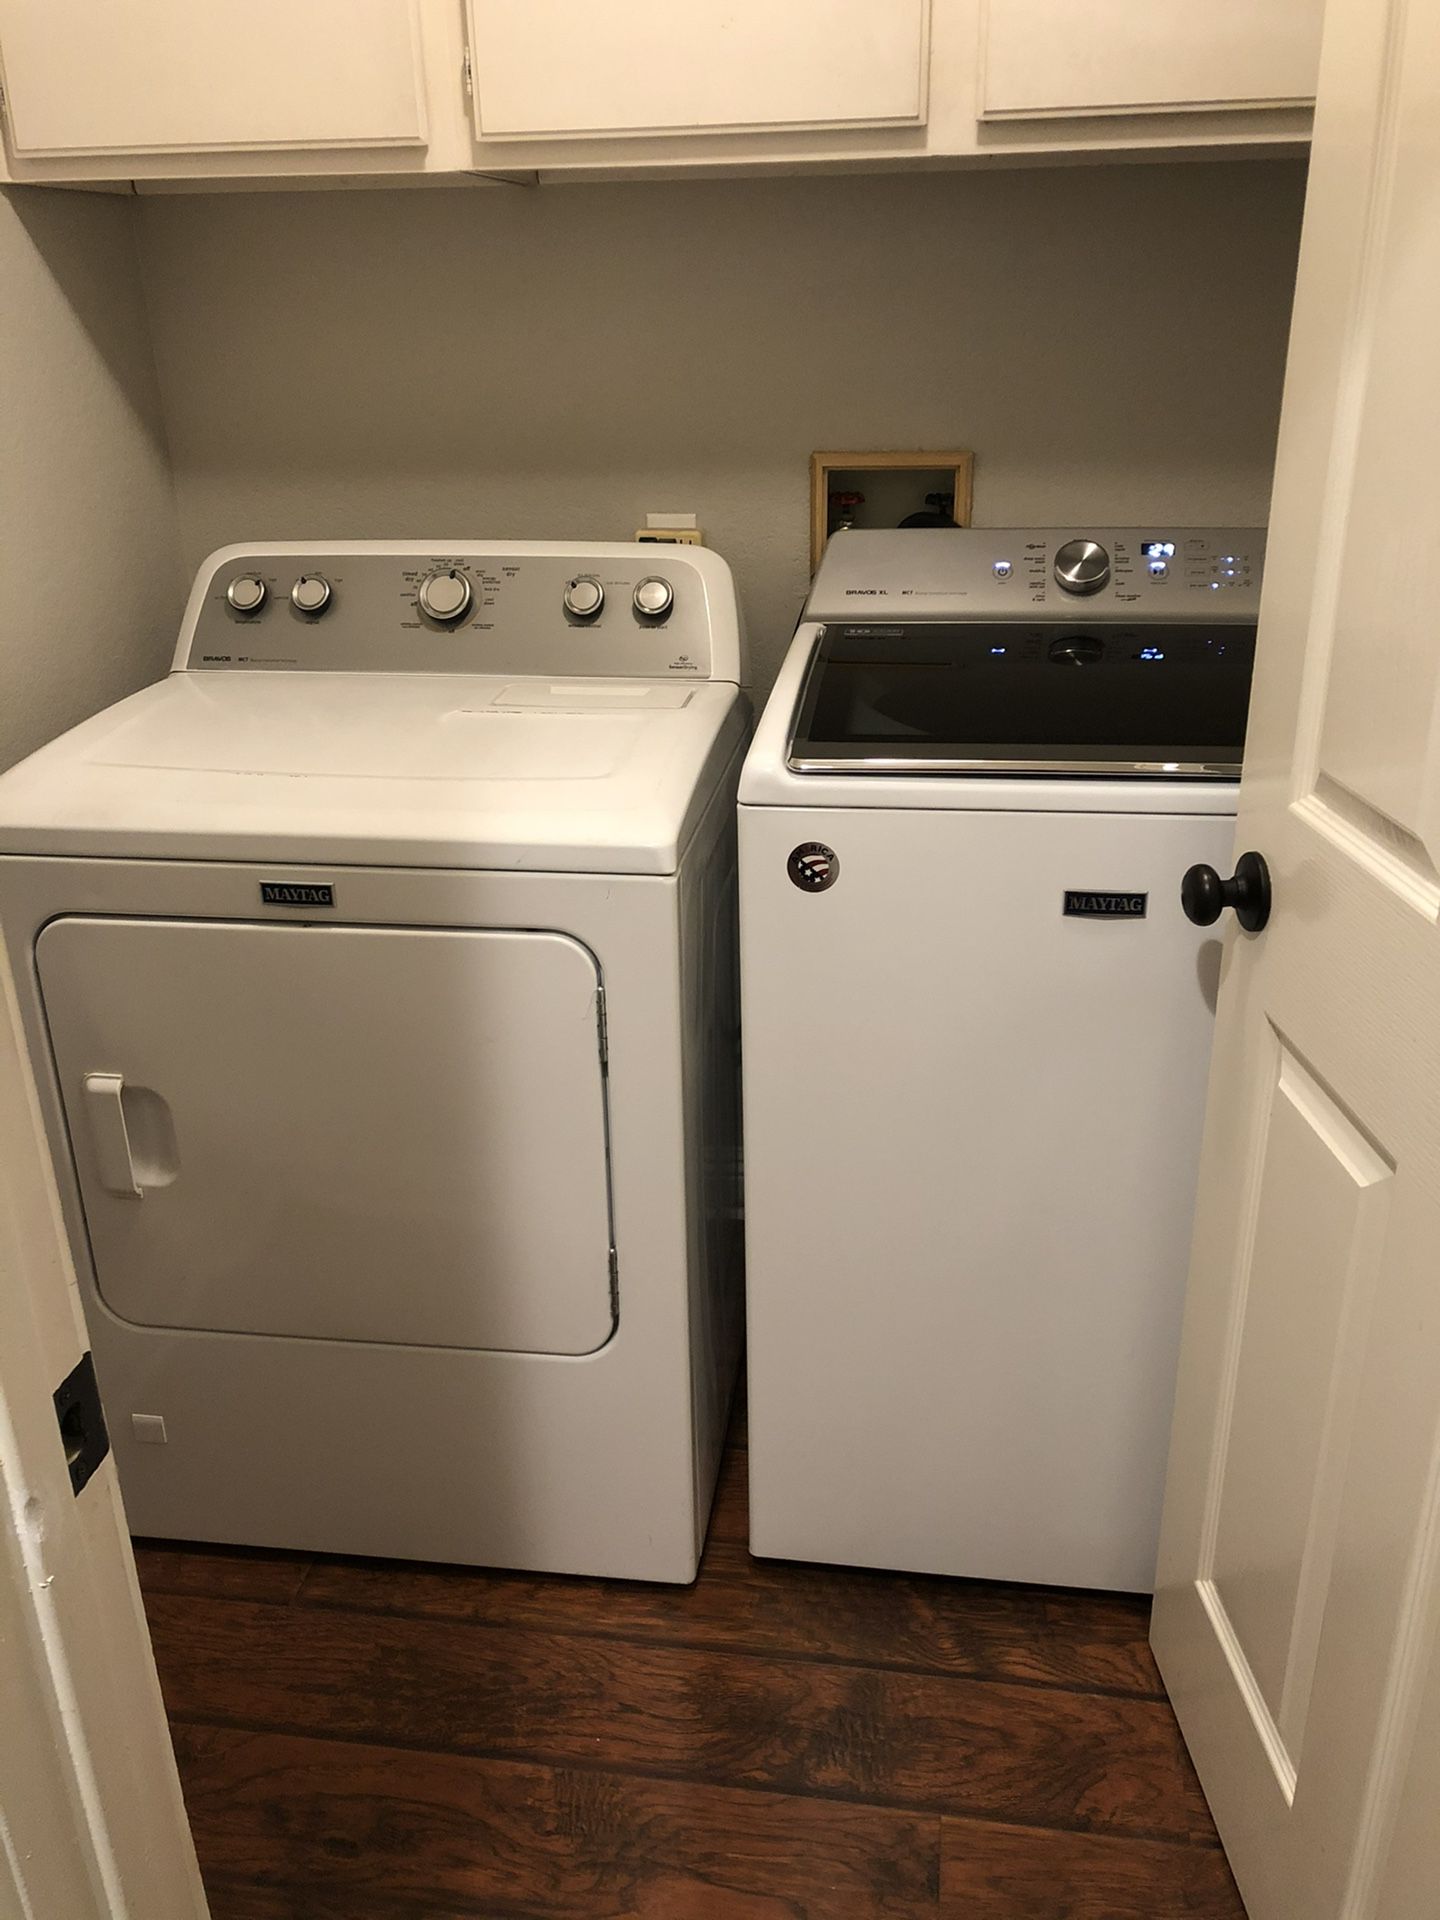 Maytag Washer And Gas Dryer (pending)